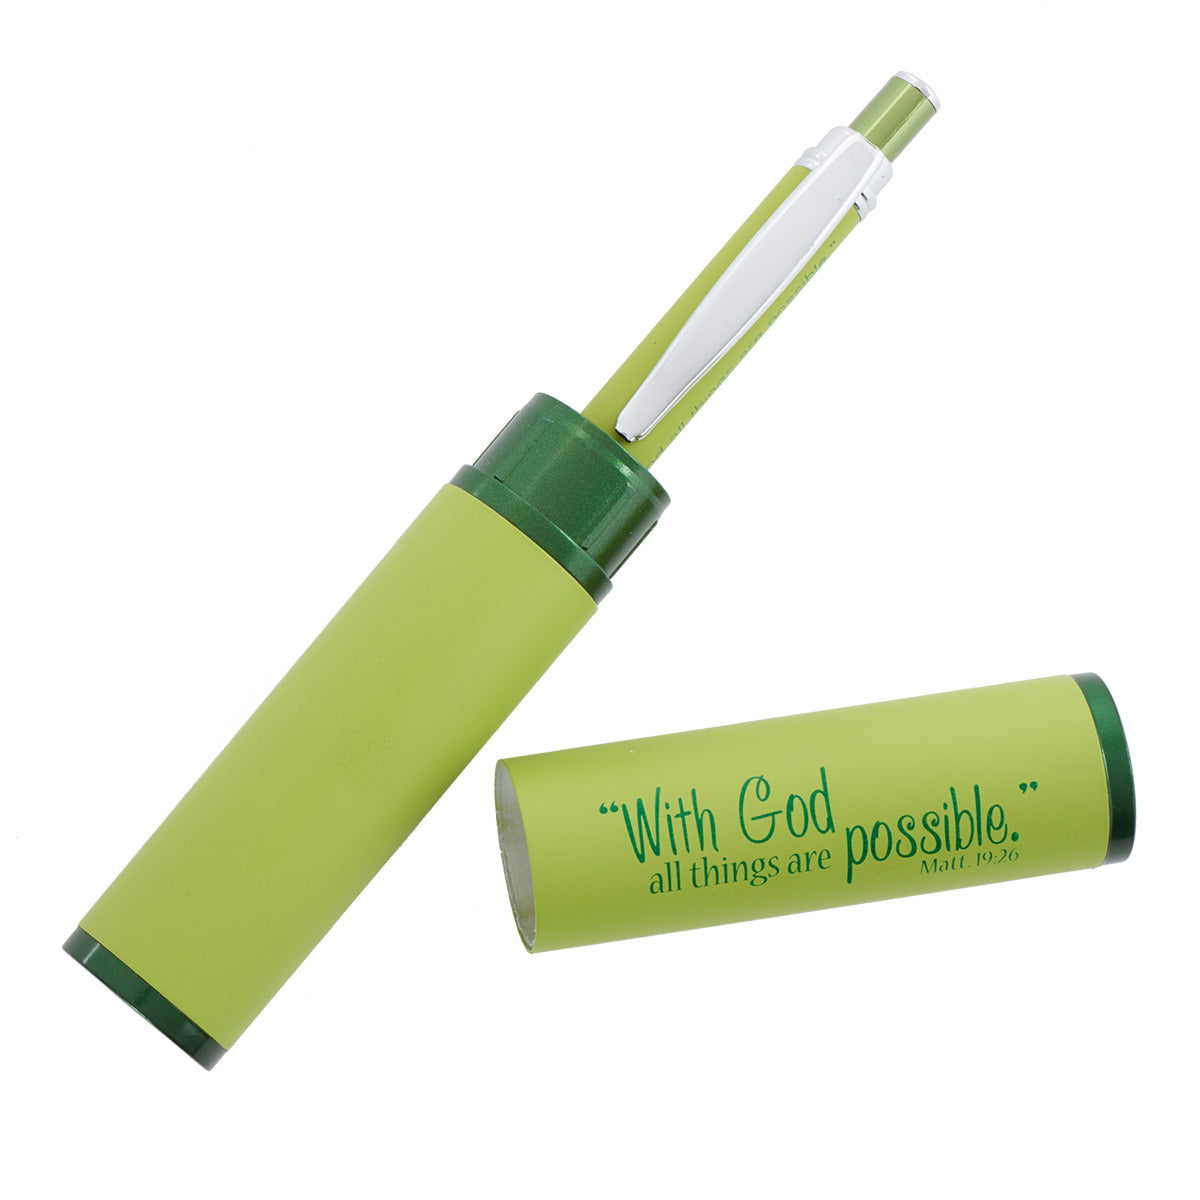 All Things are Possible Green Gift Pen and Case - Matthew 19:26 - The Christian Gift Company